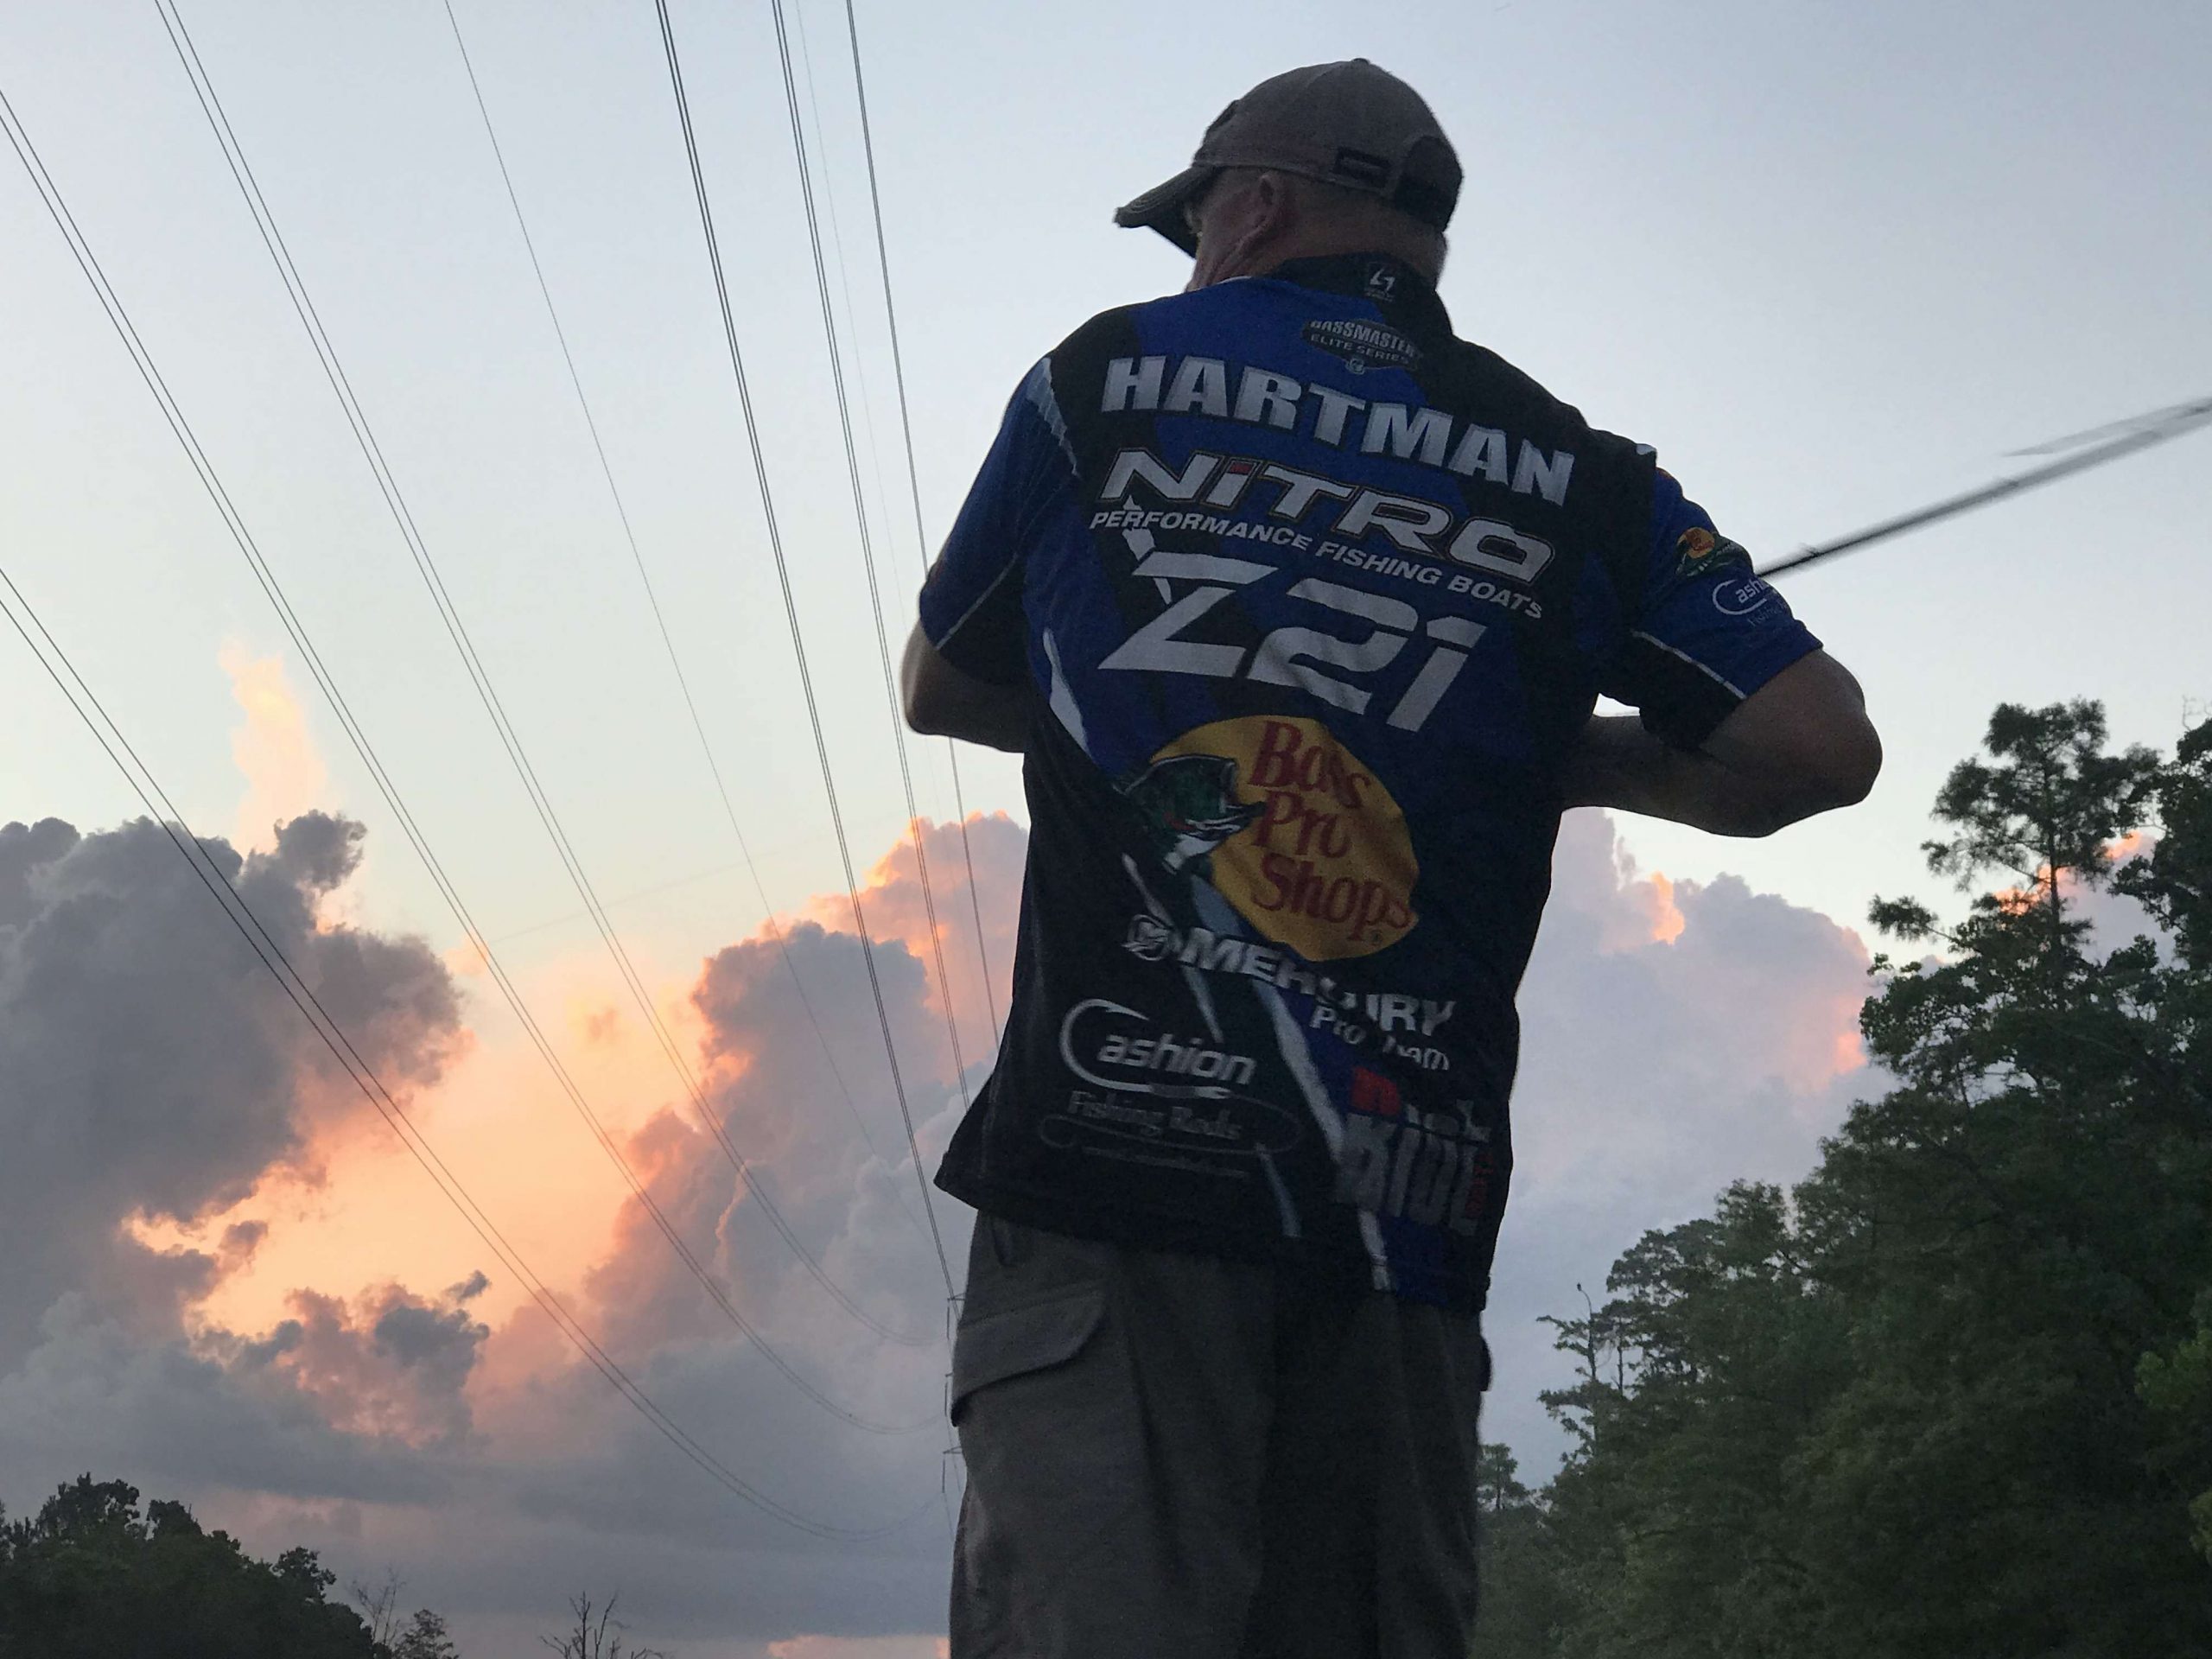 Jamie Hartman starting off day 3! Time to catch some fish!

